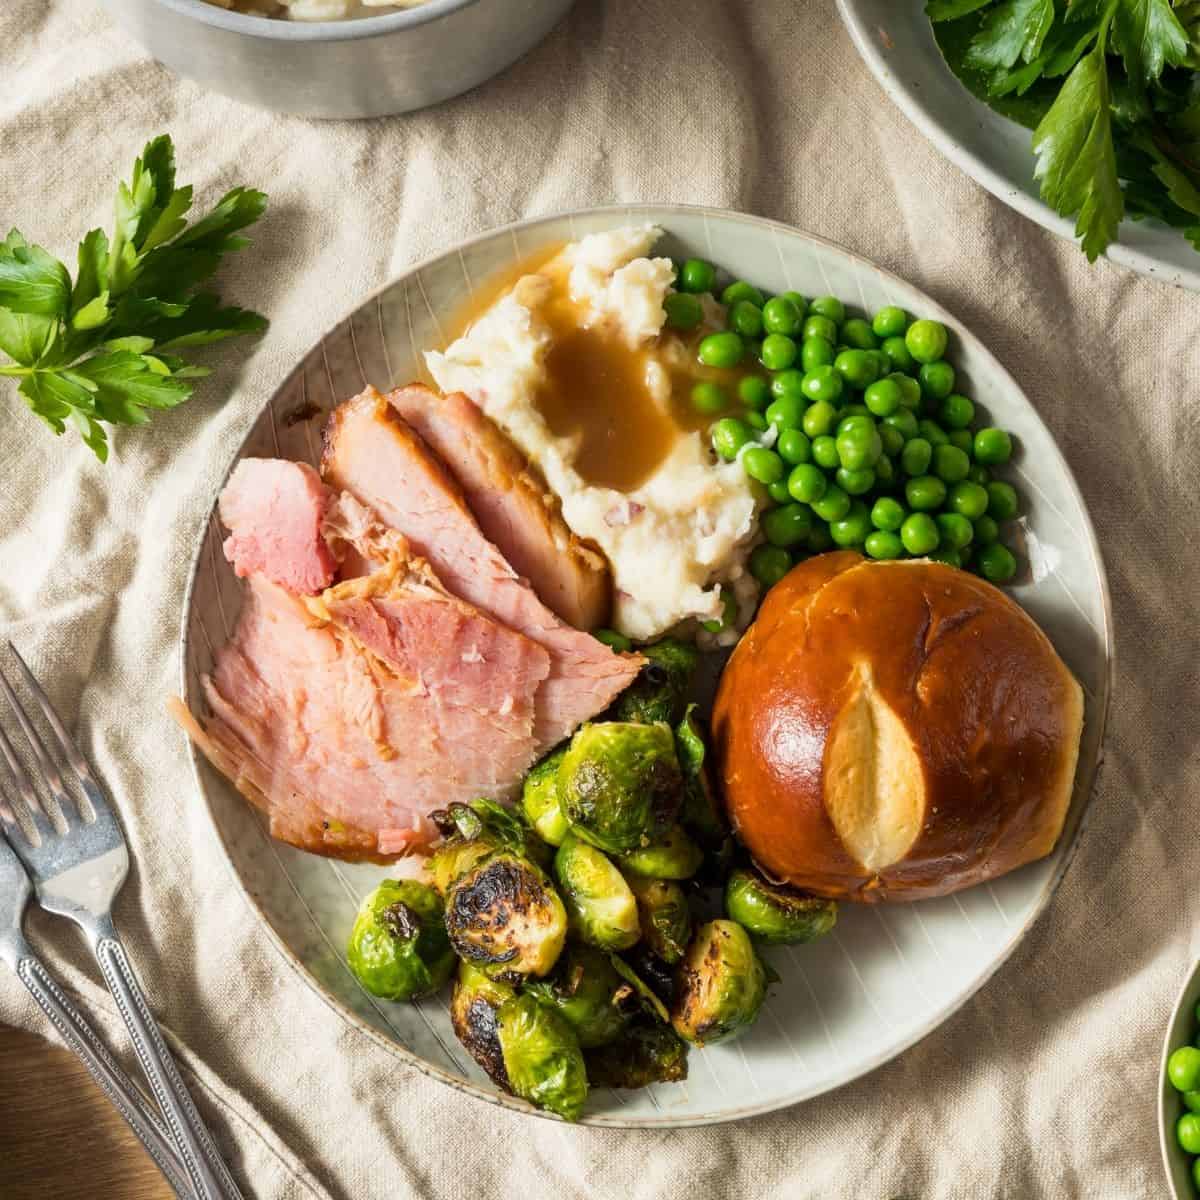 What Vegetables Go With Ham